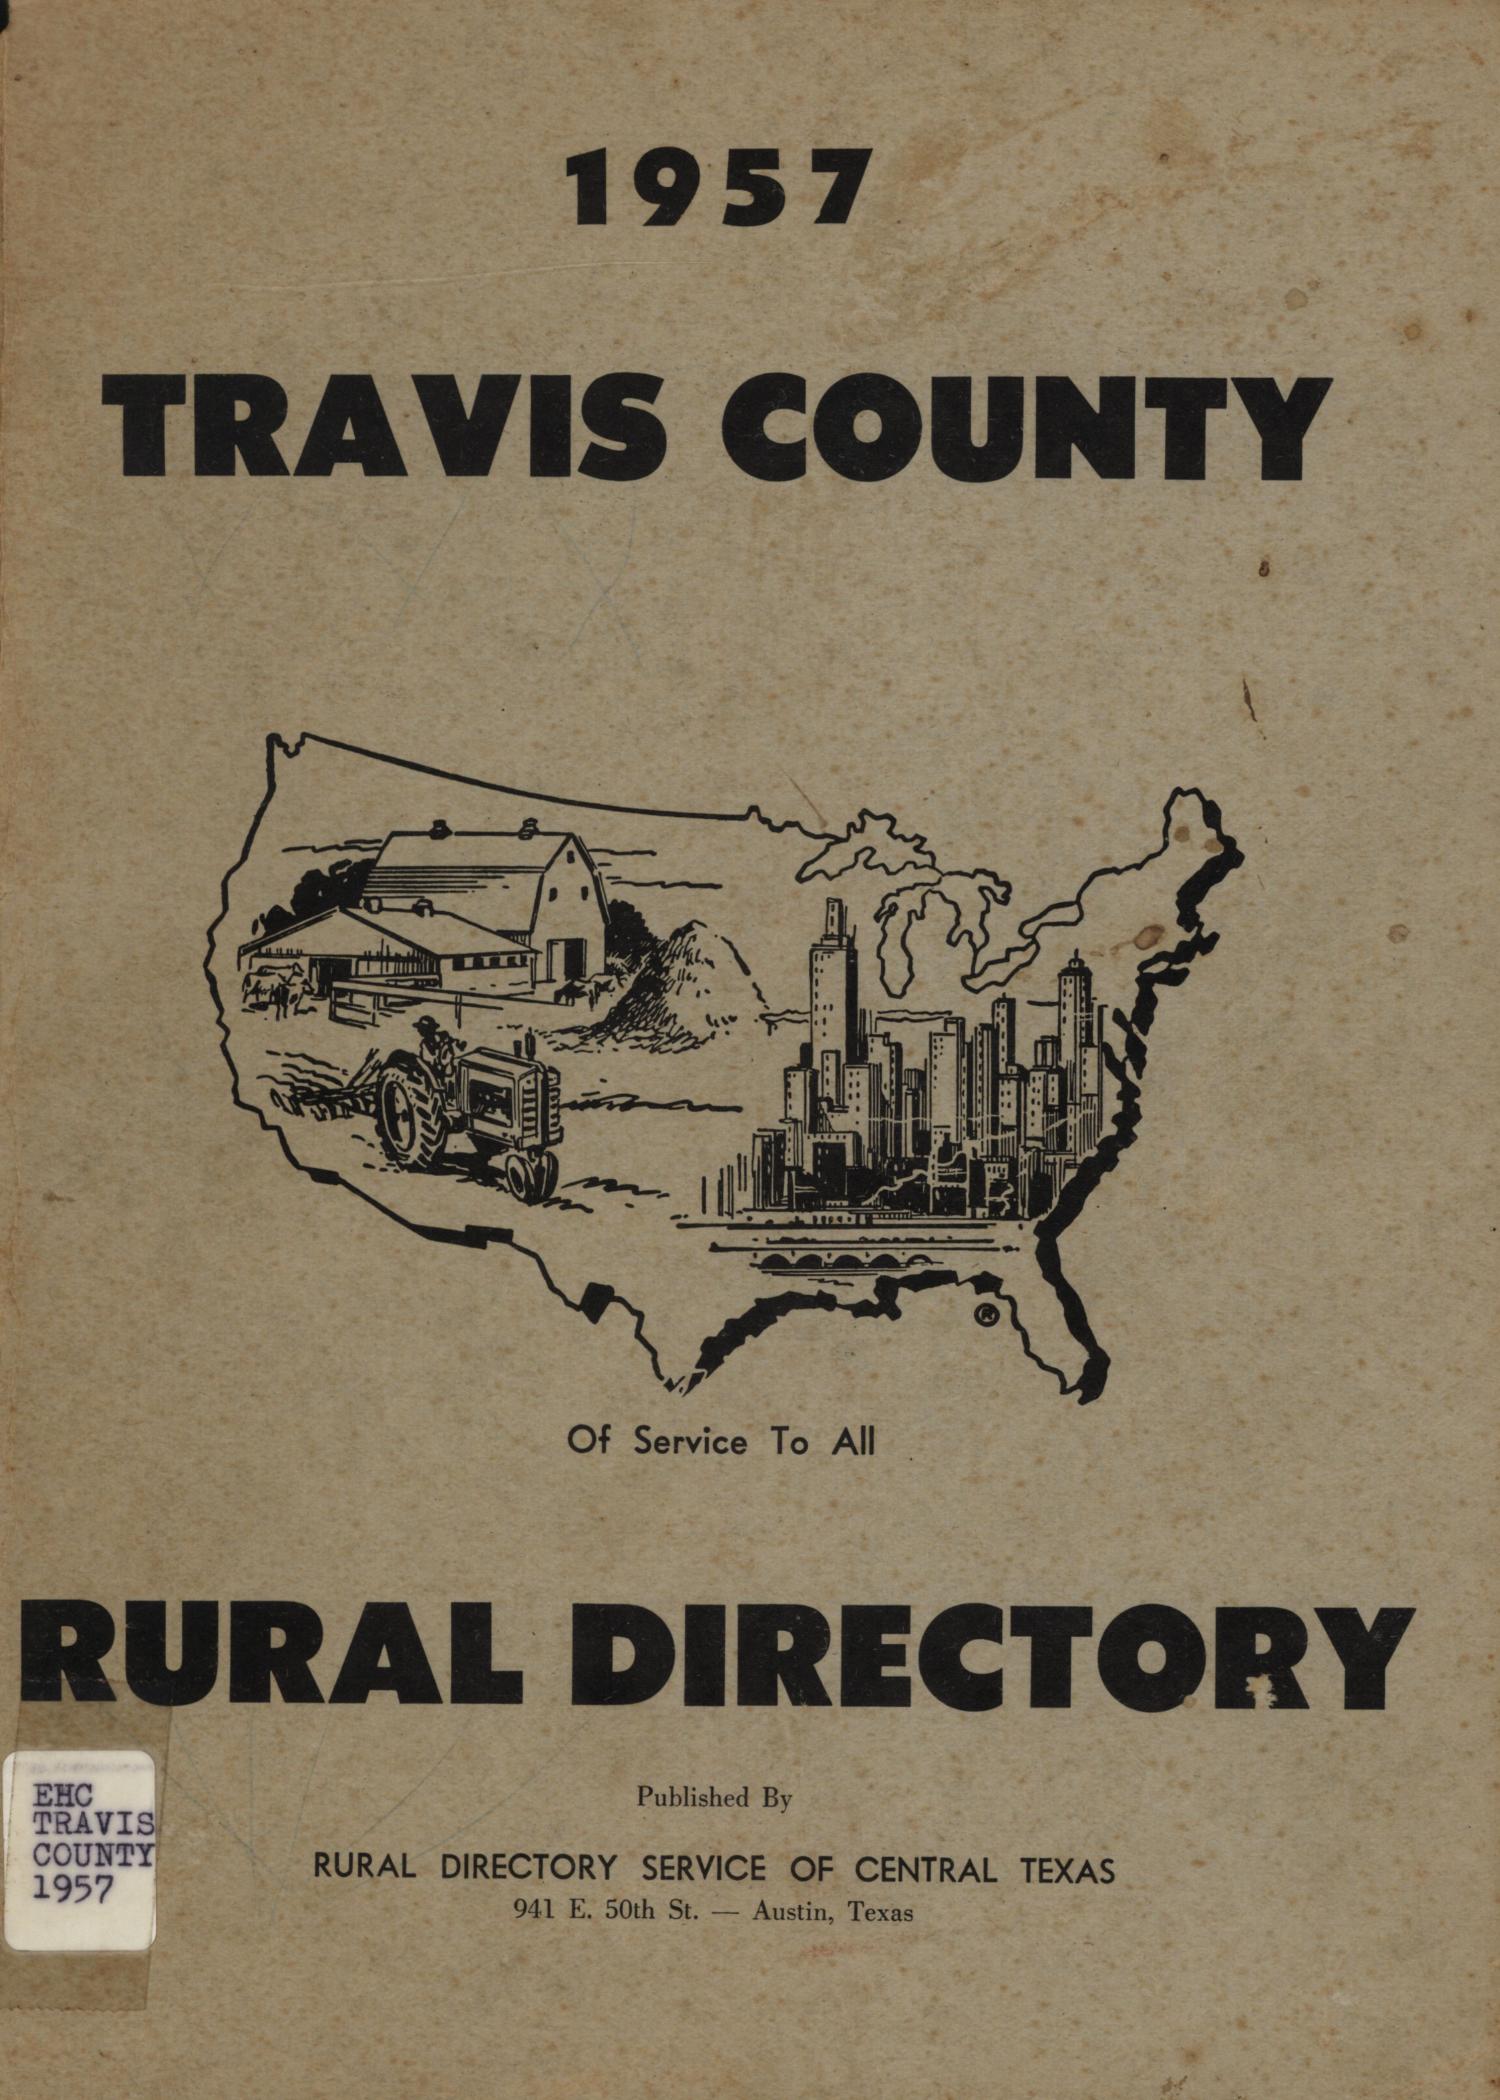 1957 Travis County Rural Directory
                                                
                                                    Front Cover
                                                